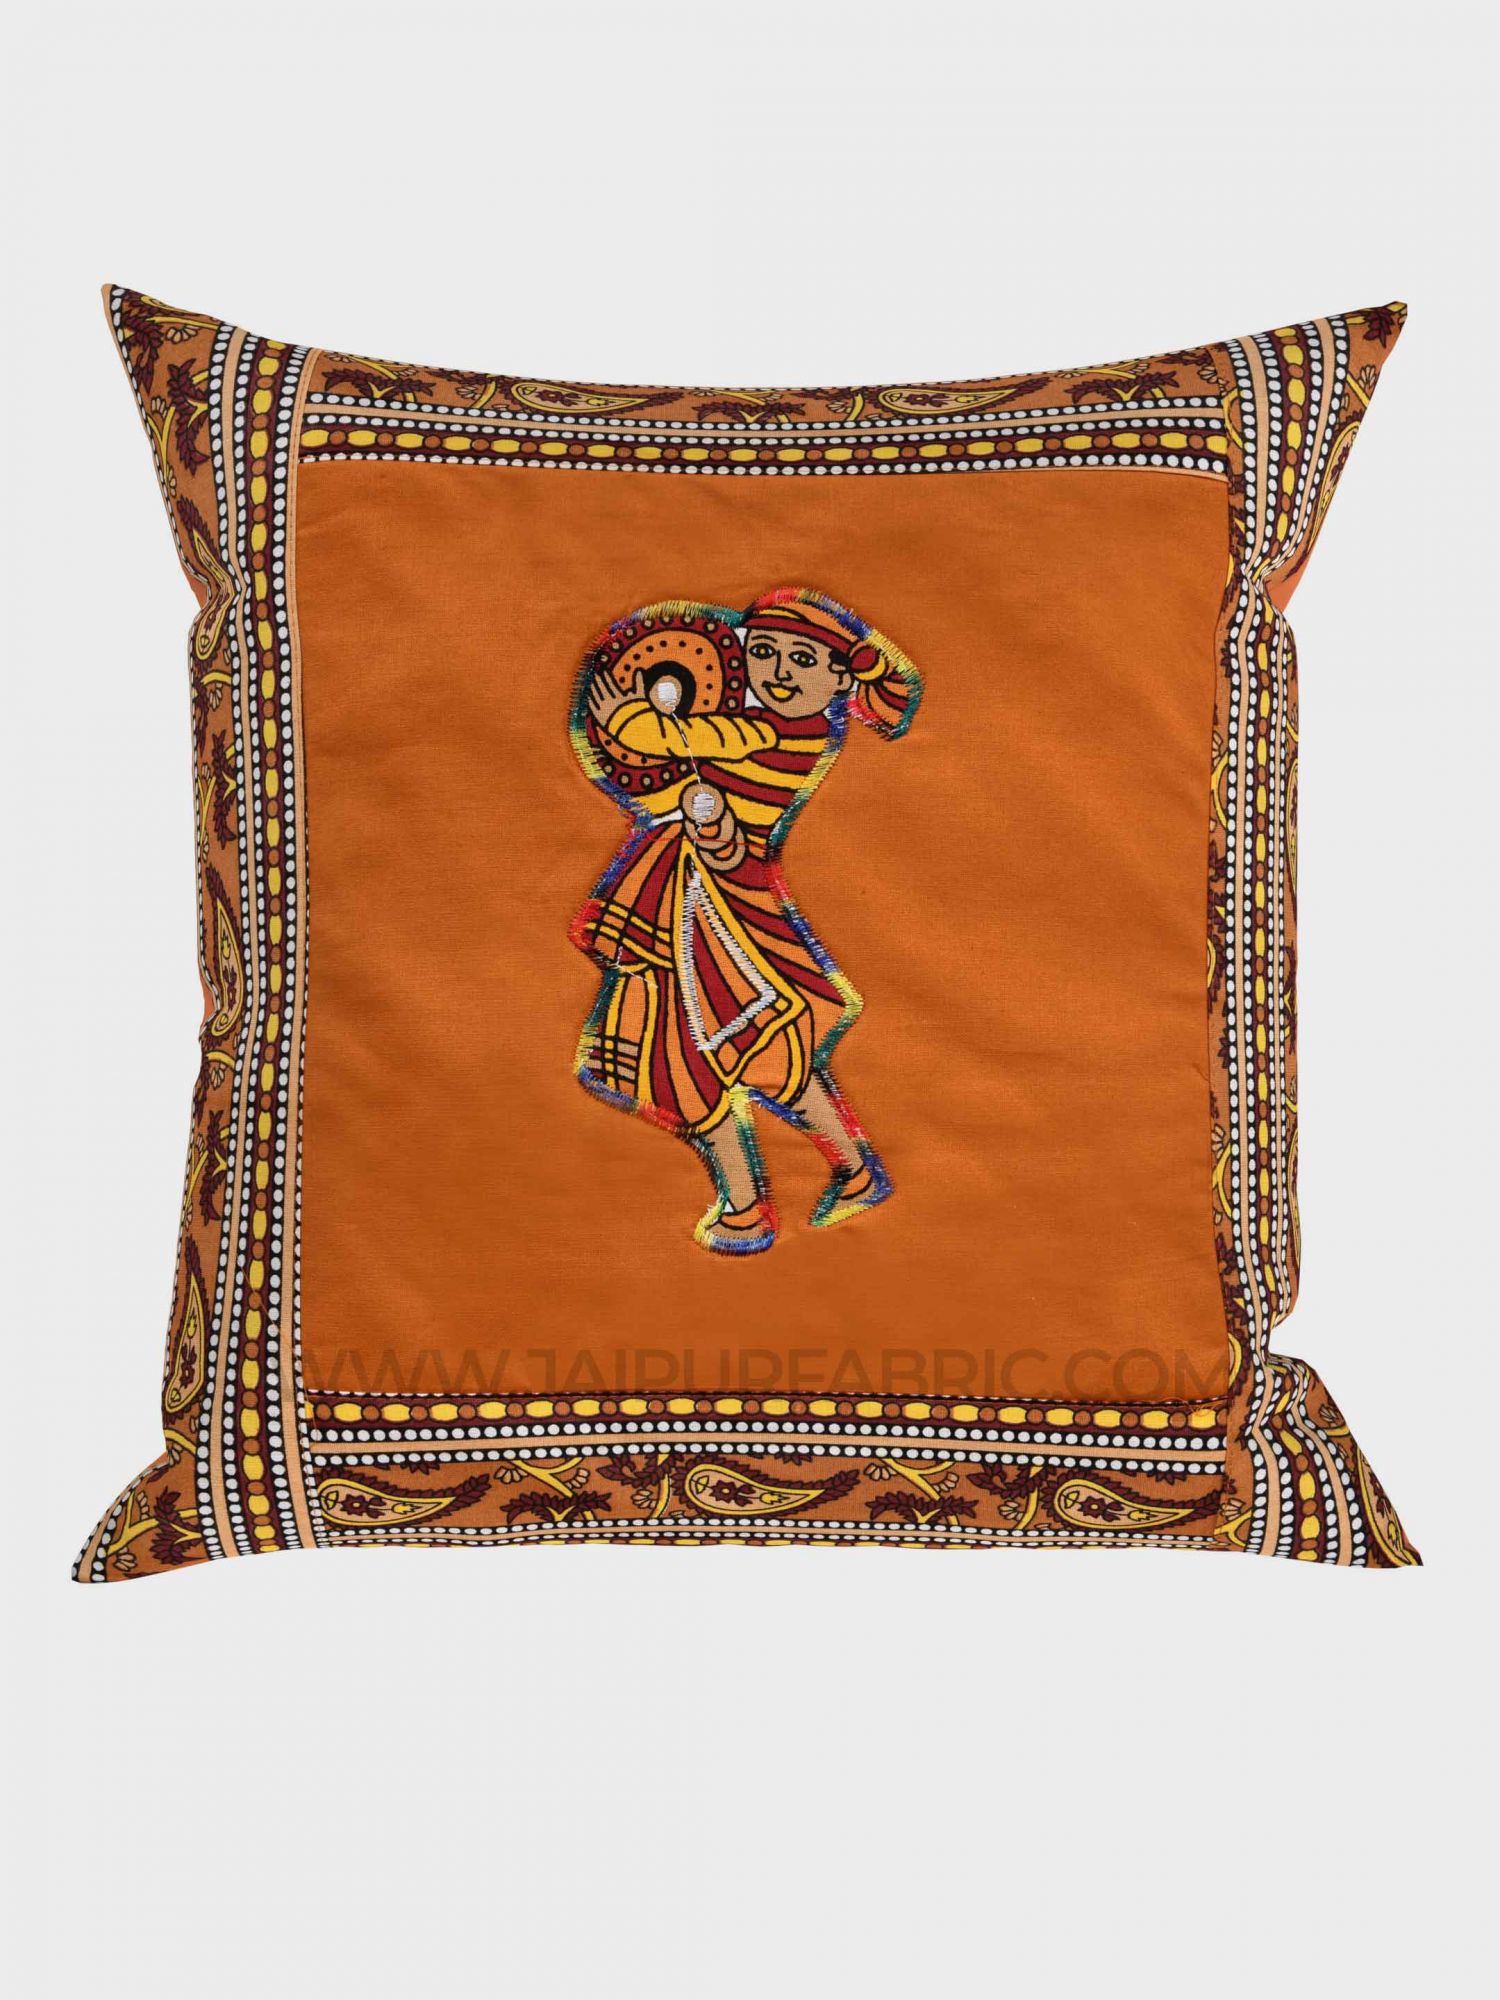 Applique Mustard Chang Dance Jaipuri Hand Made Embroidery Patch Work Cushion Cover